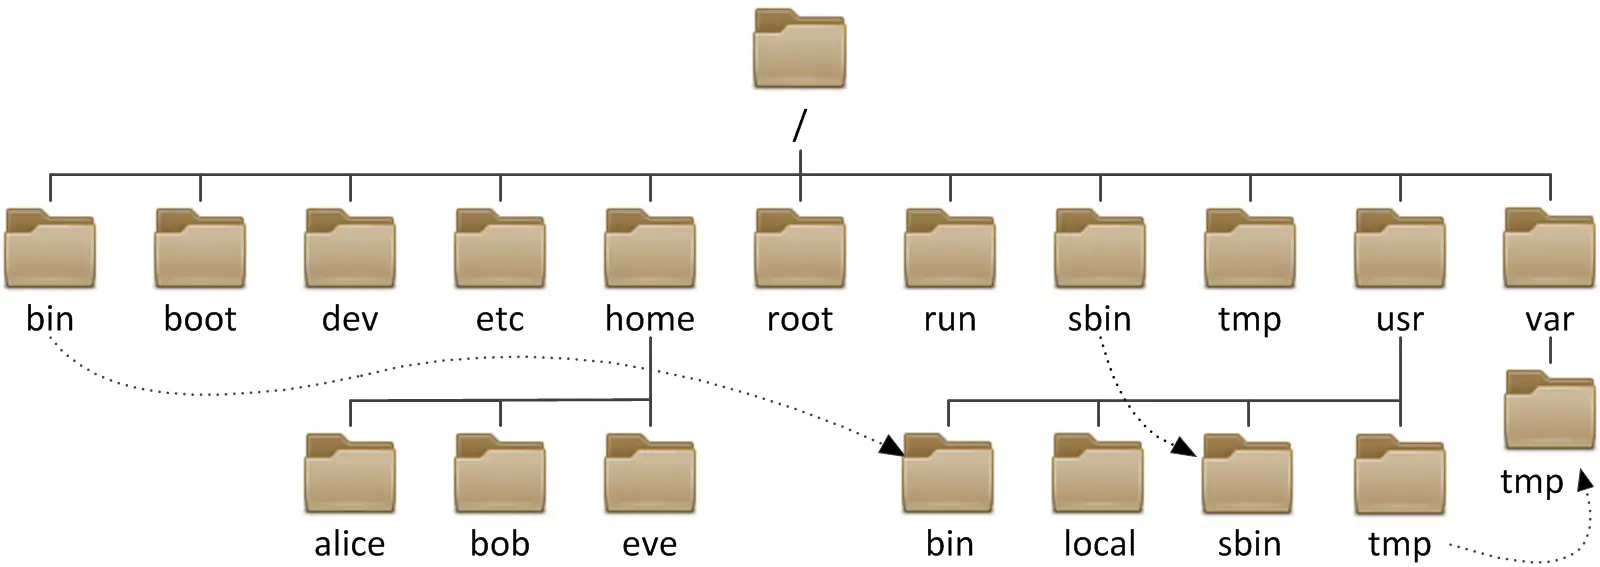 Linux-Directory-Structure